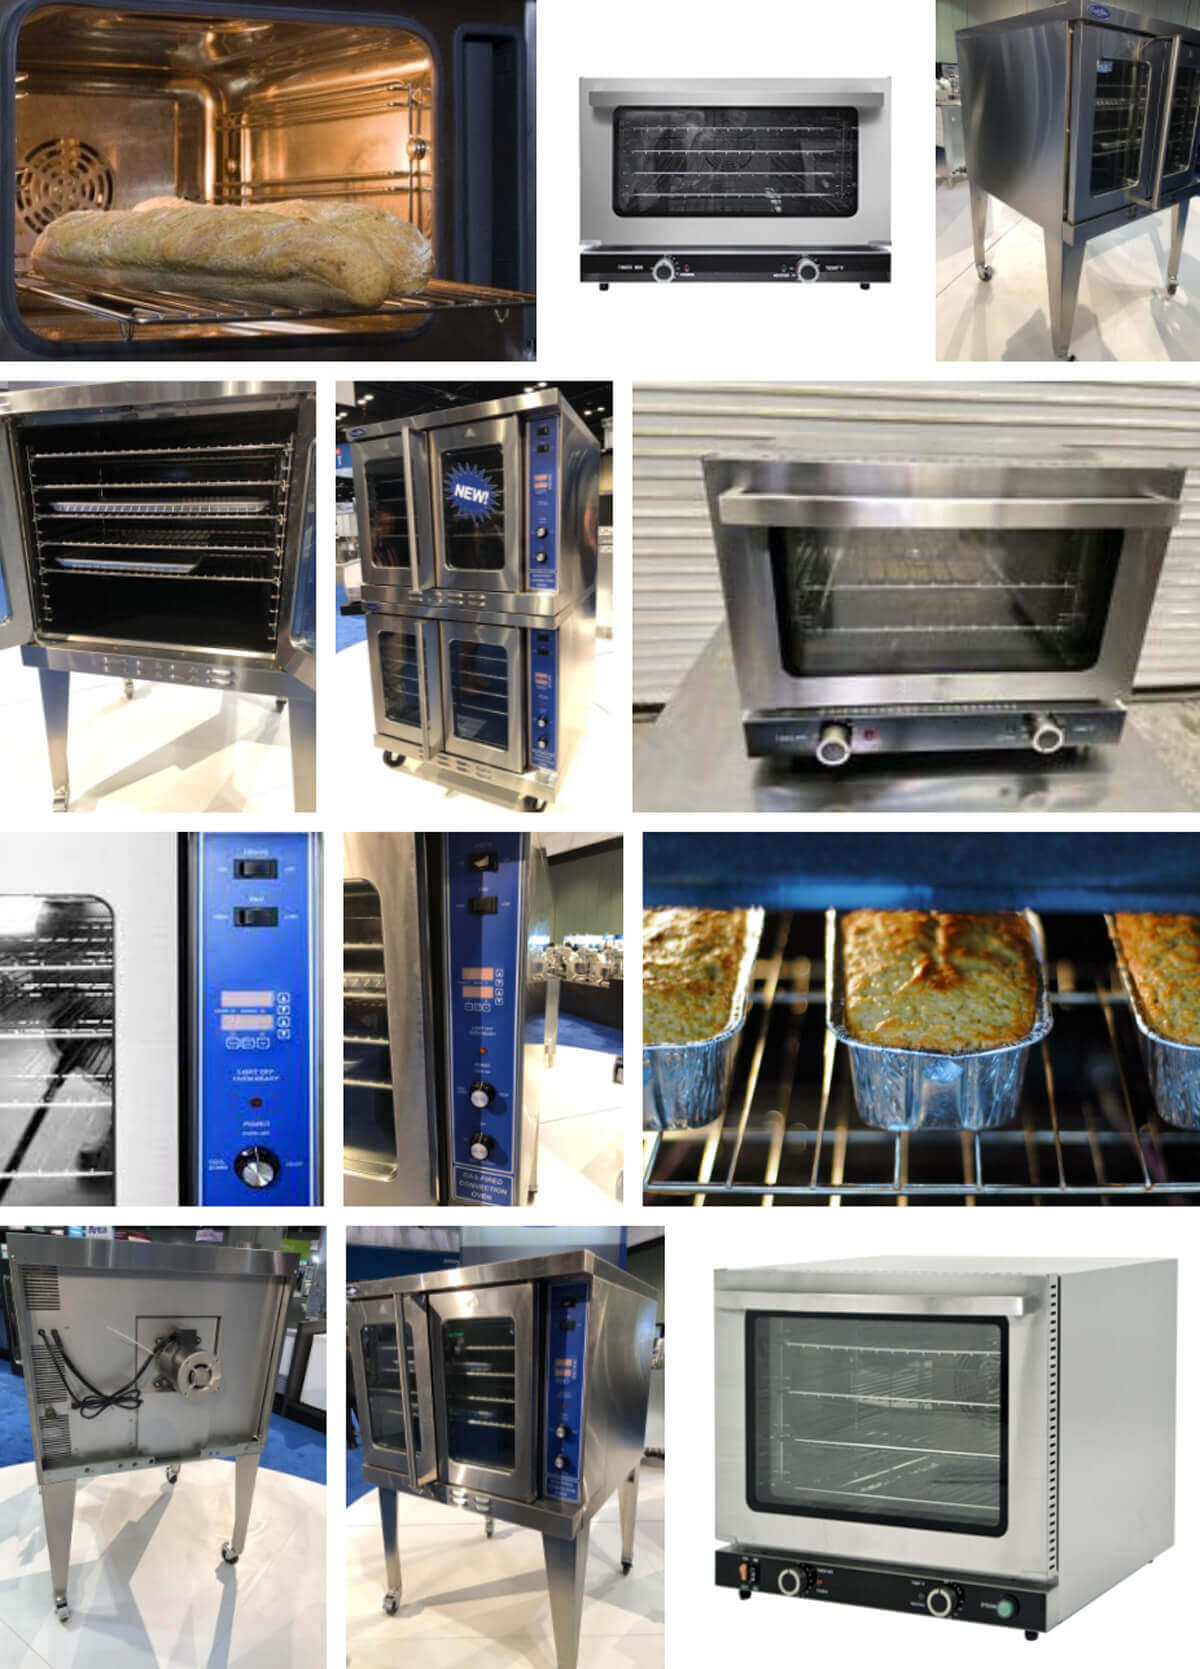 comercial convection ovens